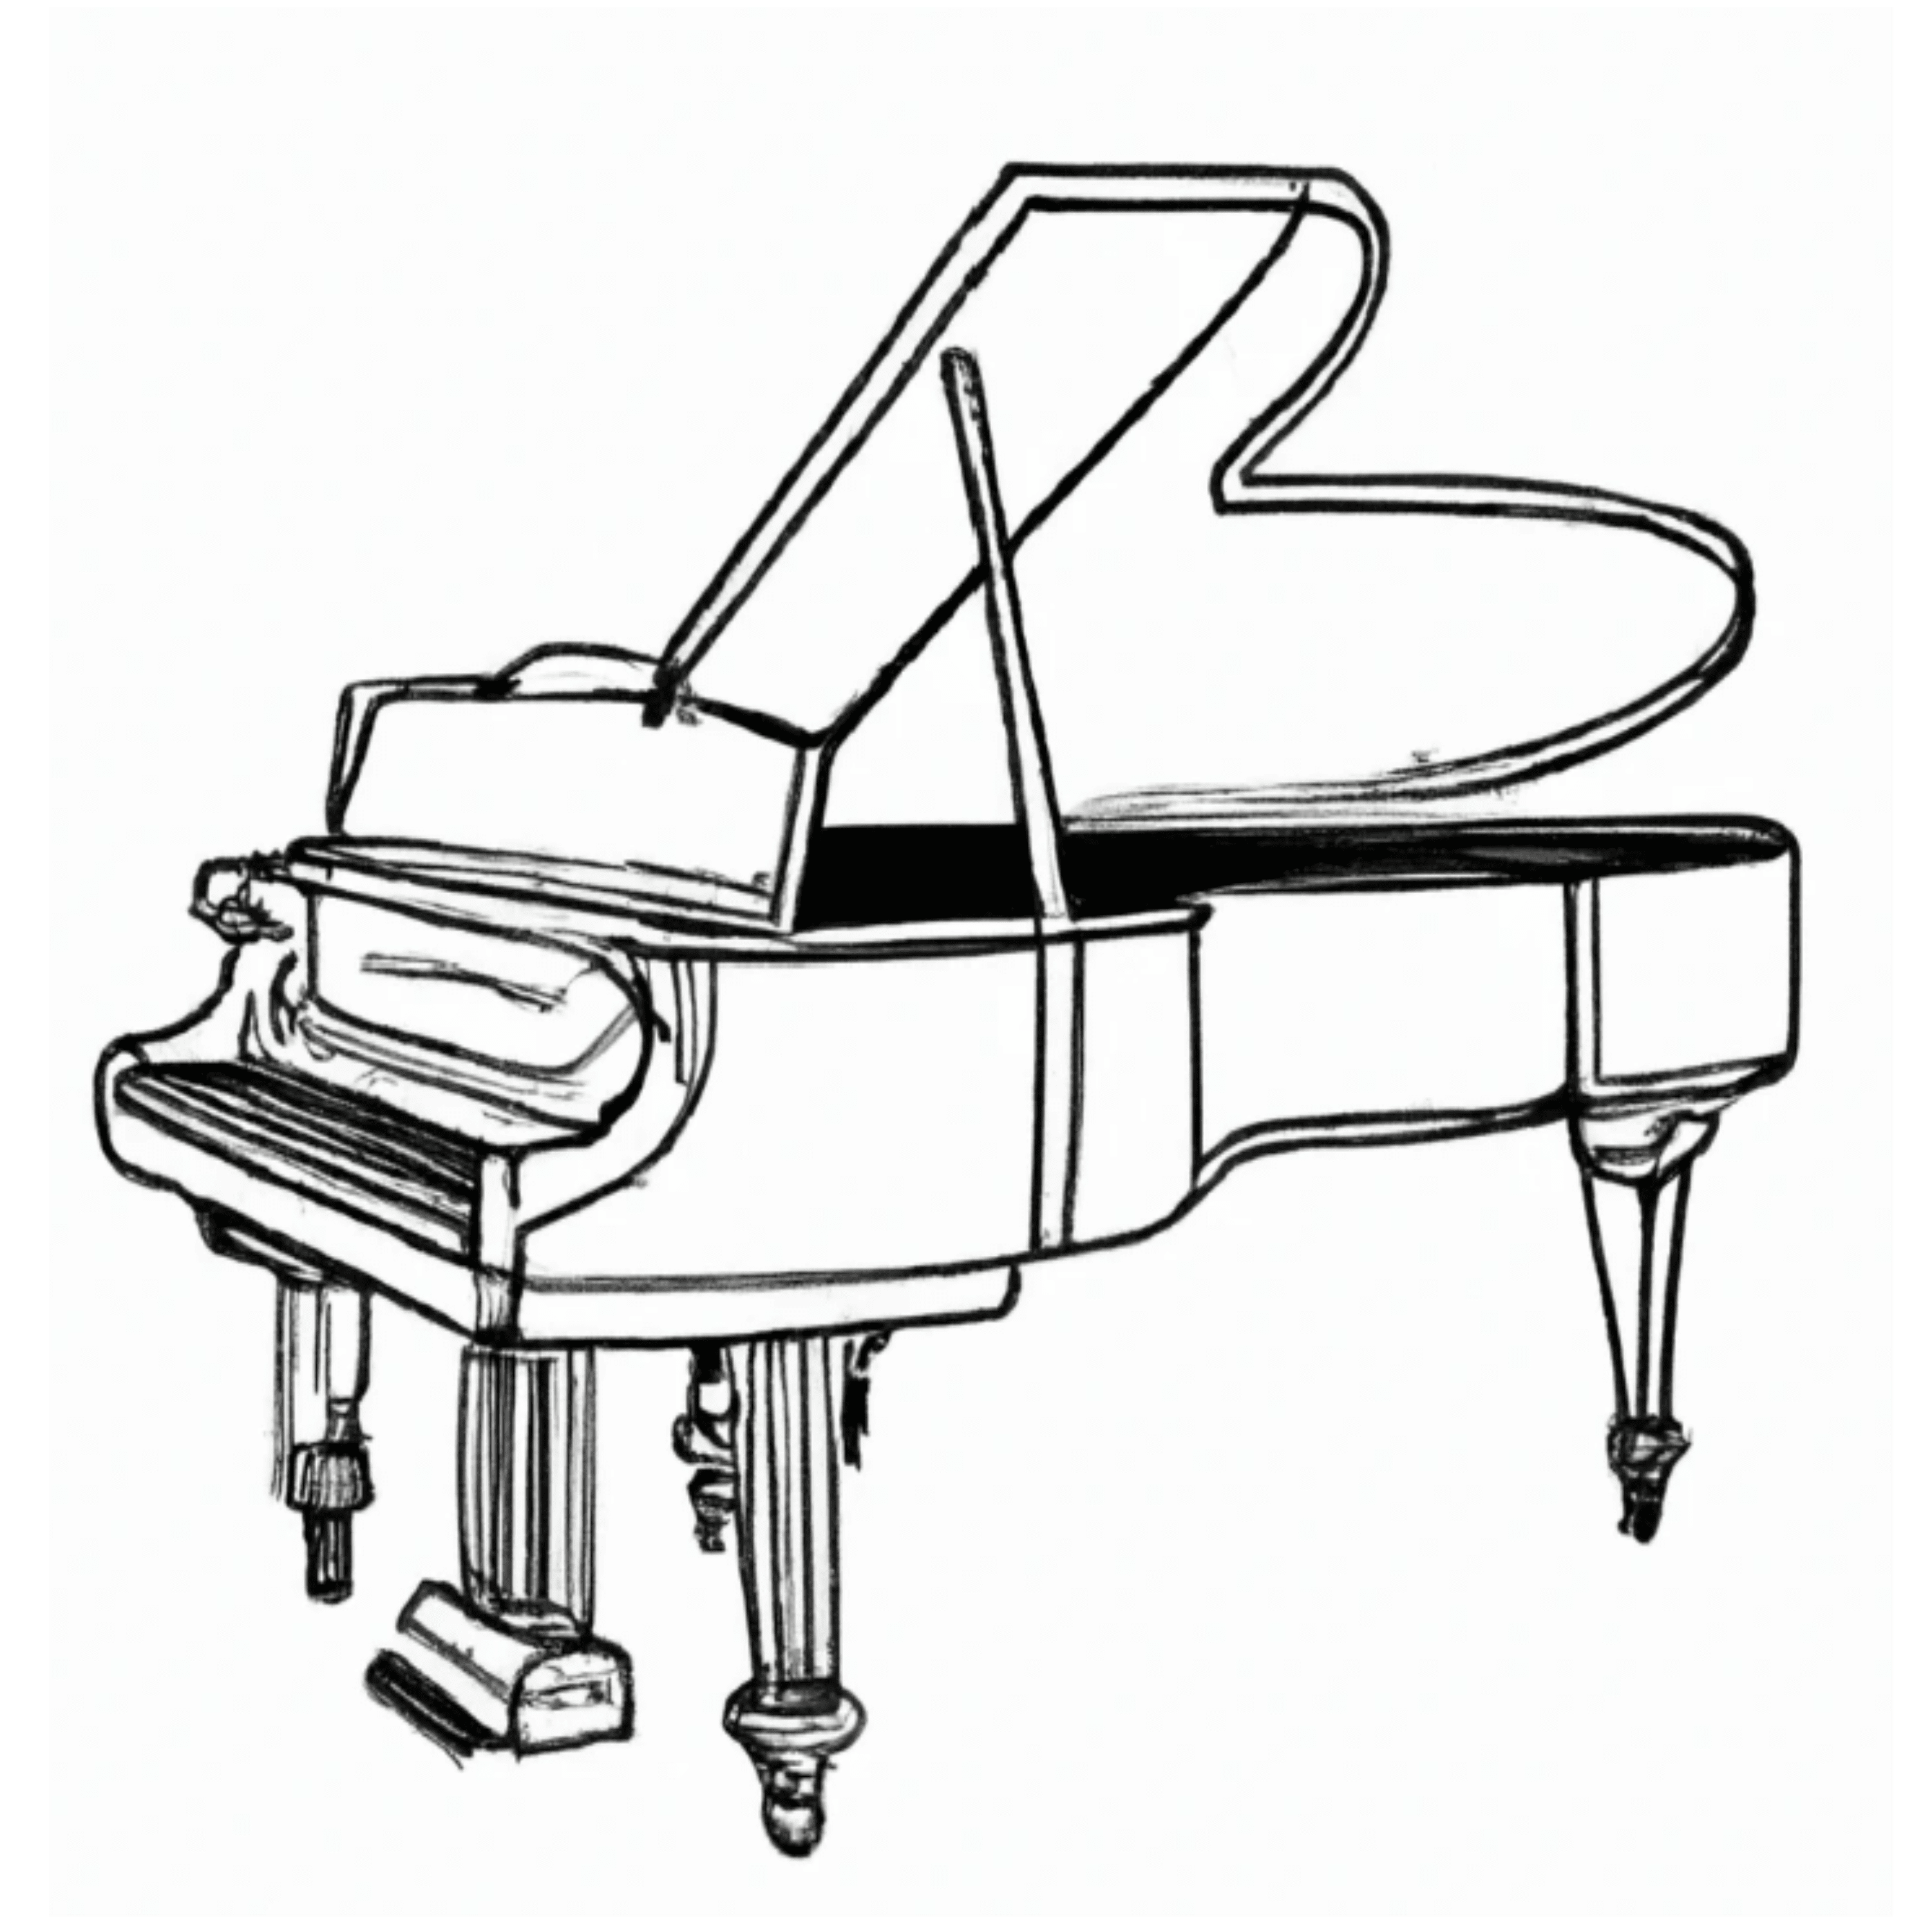 Line drawing of a grand piano